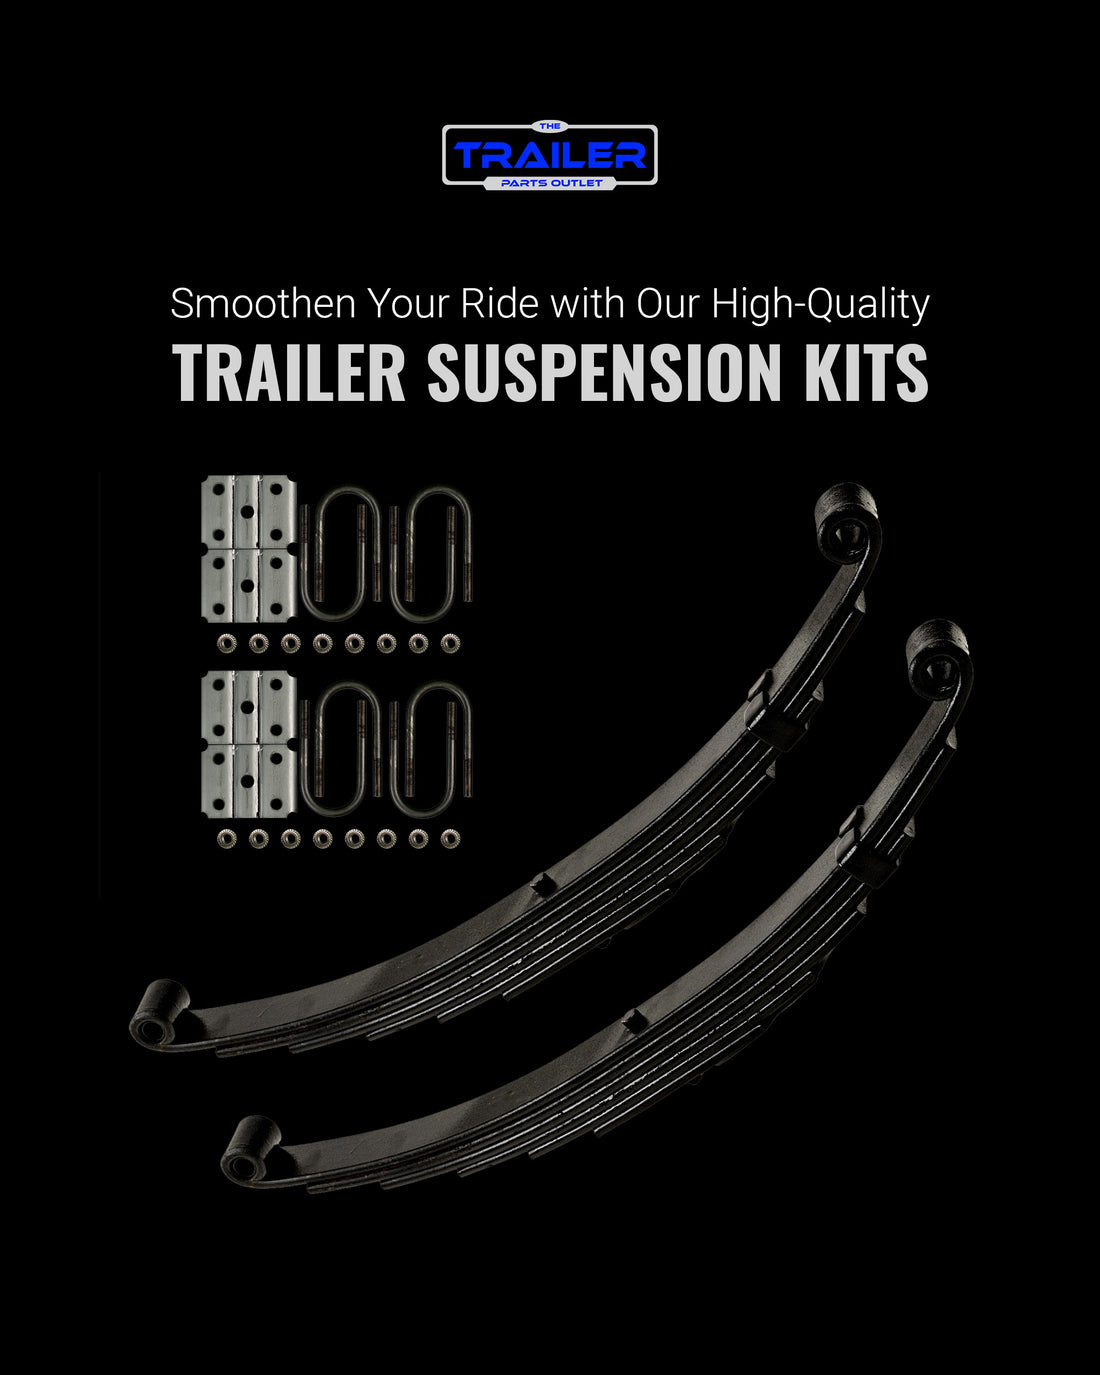 Smoothen Your Ride with Our High-Quality Trailer Suspension Kits